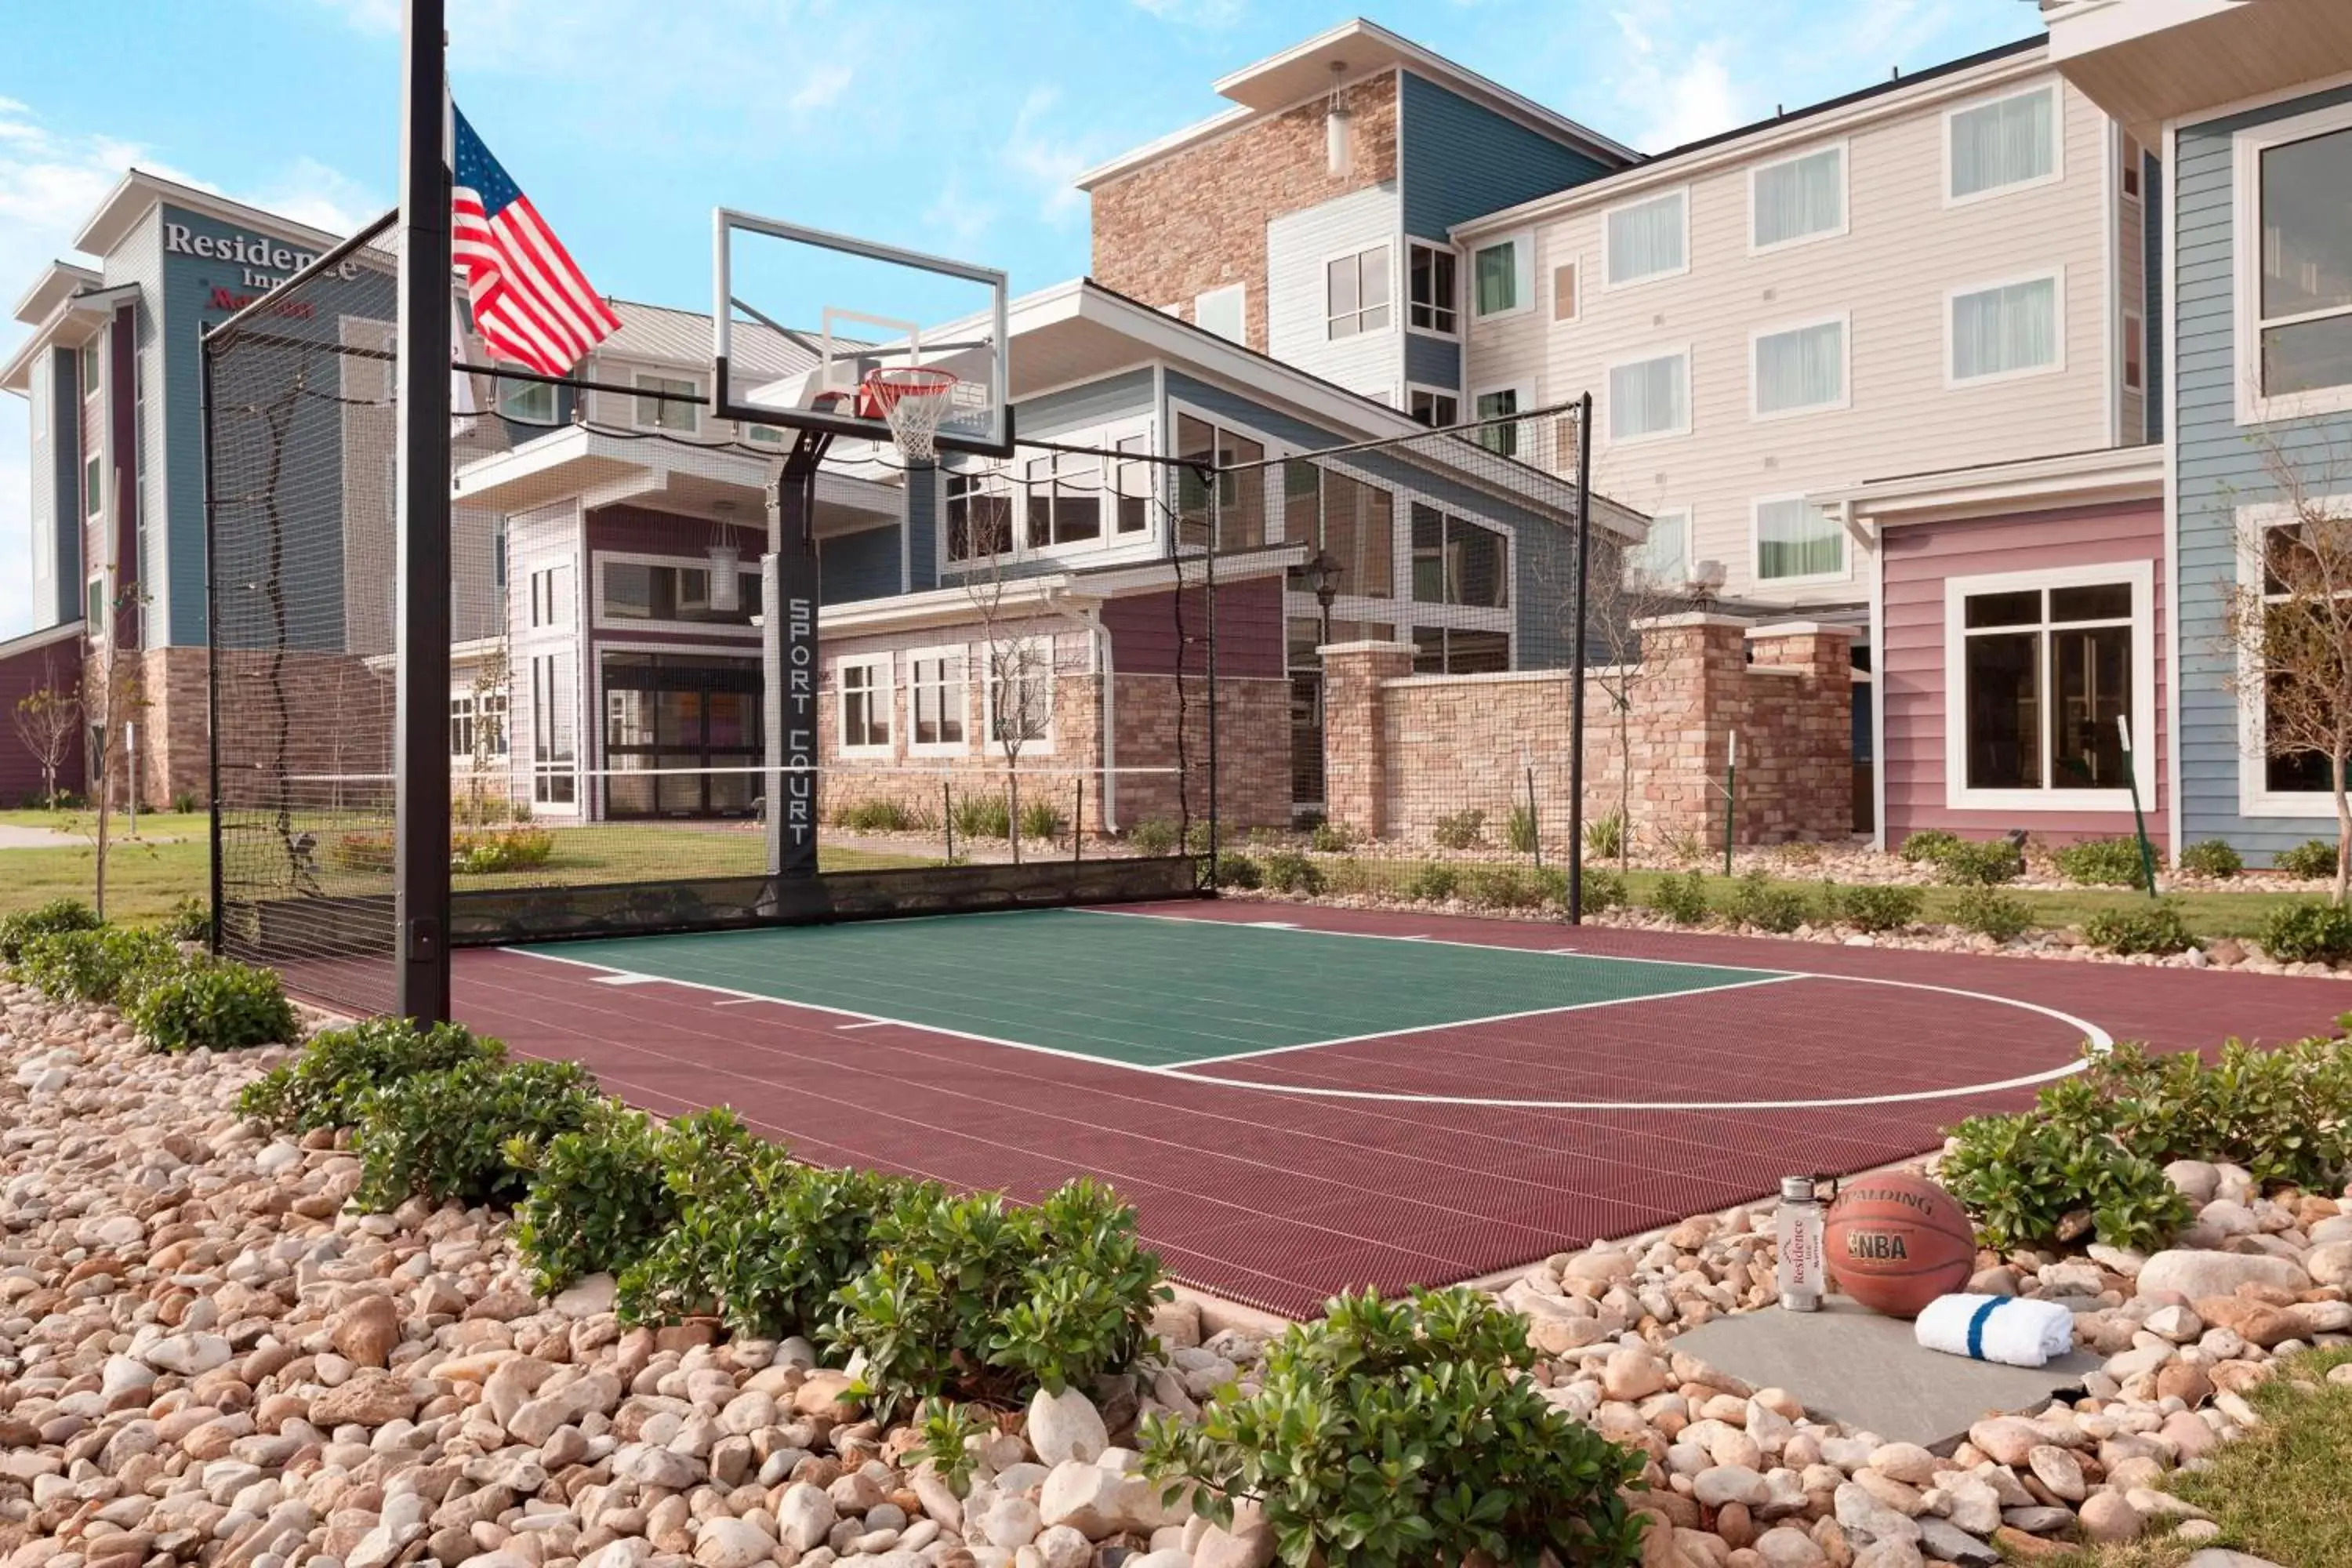 Area and facilities, Other Activities in Residence Inn San Angelo